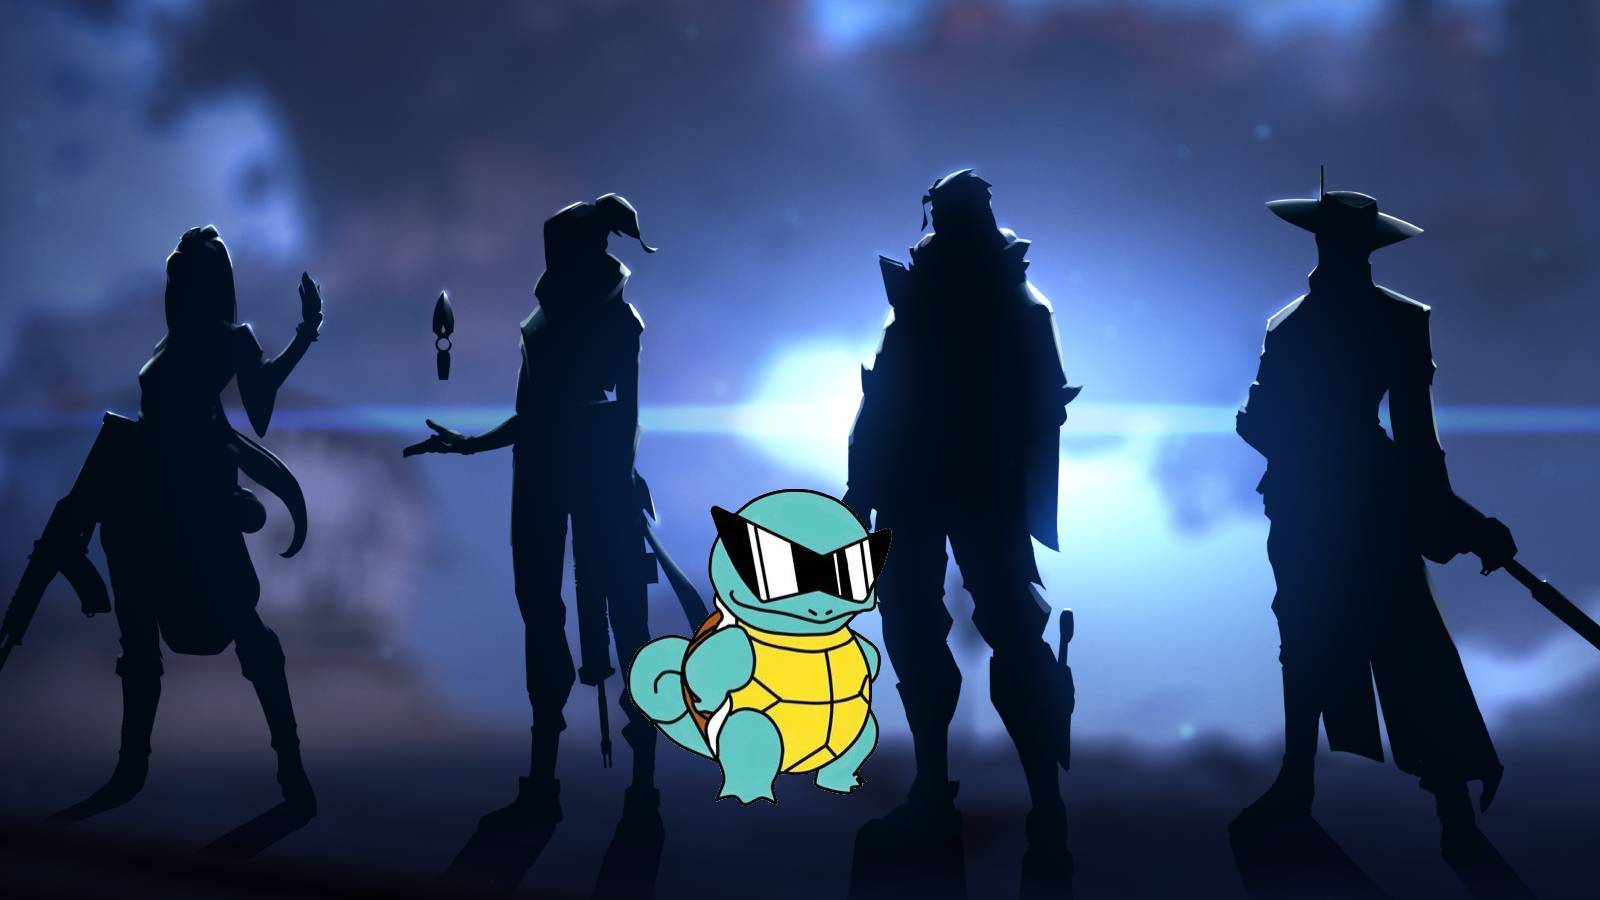 Valorant Agent silhouettes with the Squirtle Squad logo in the middle